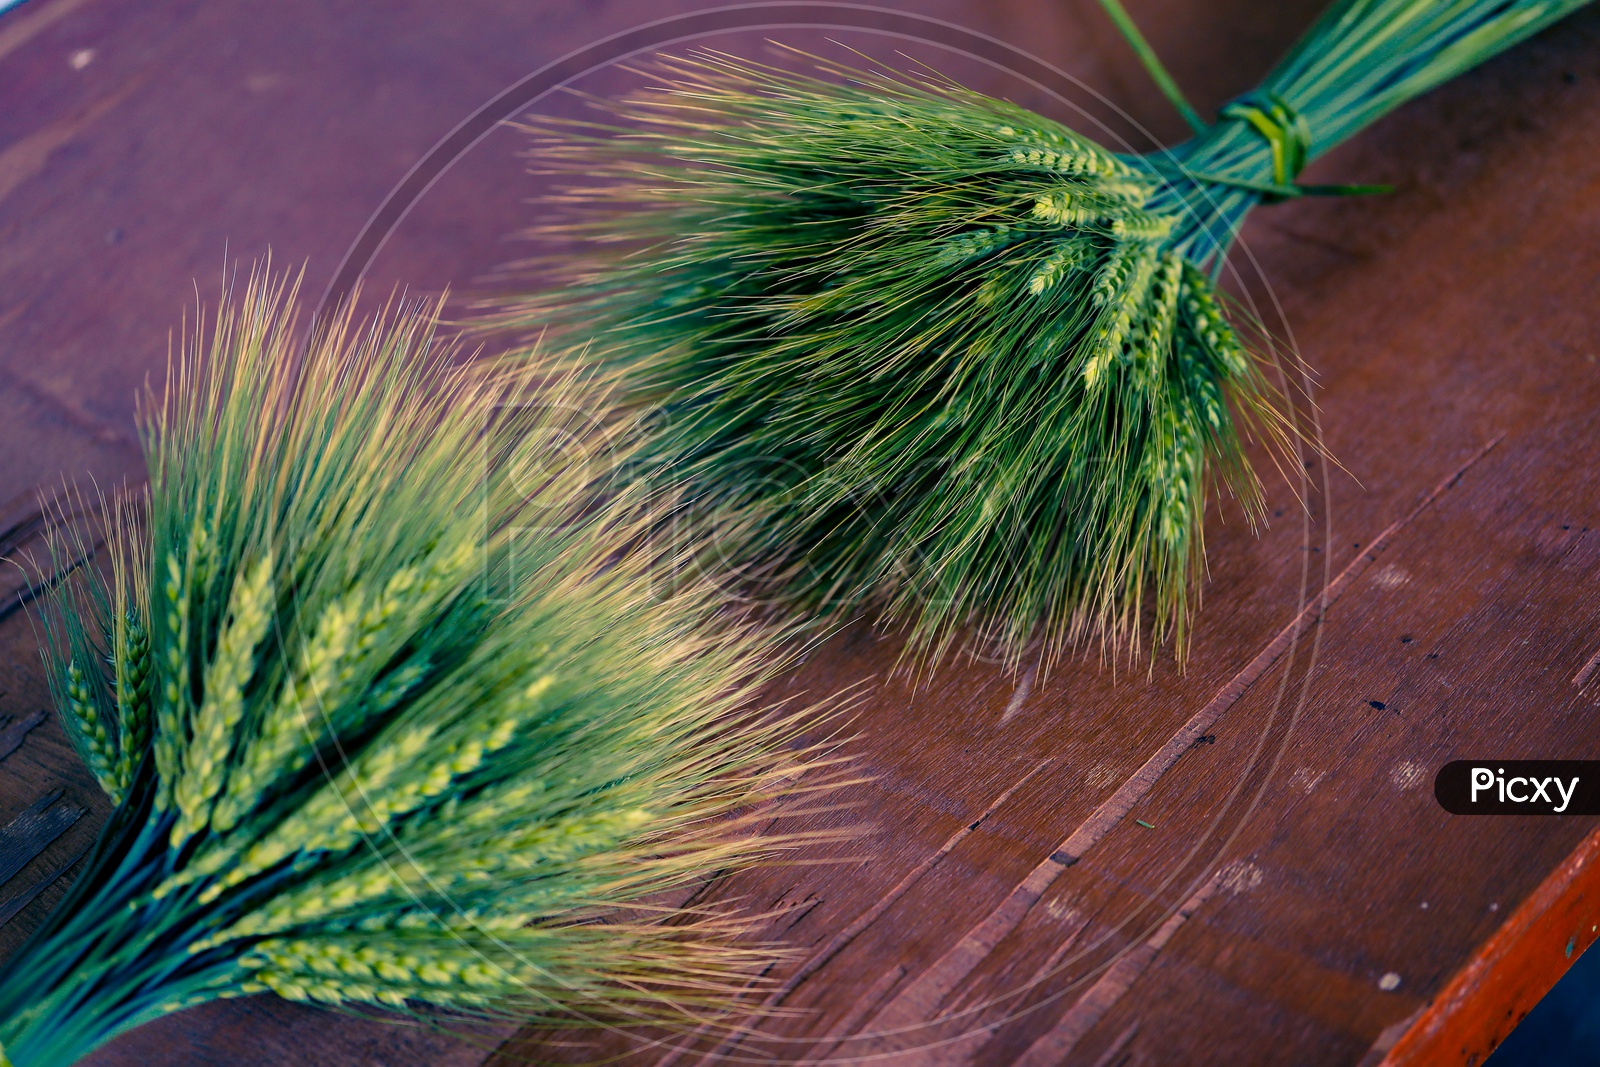 Young  Green  Wheat Ears Or Spikelets  Bunch  Closeup  On a Wooden Table Background